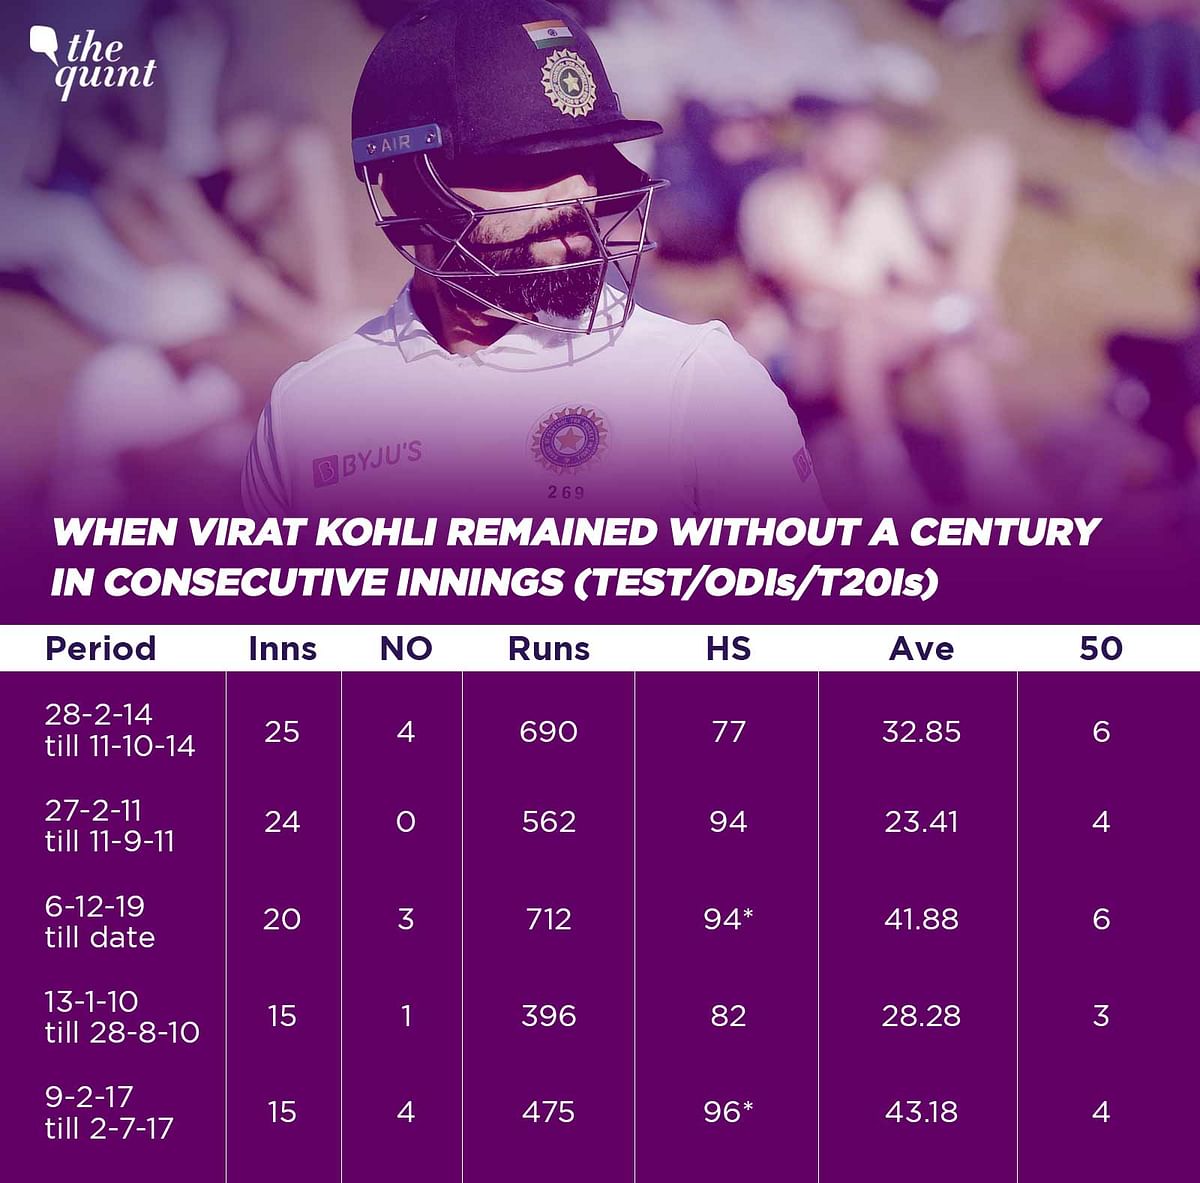 For the first time since 2017, the skipper hasn’t scored a century for 20 innings across formats.